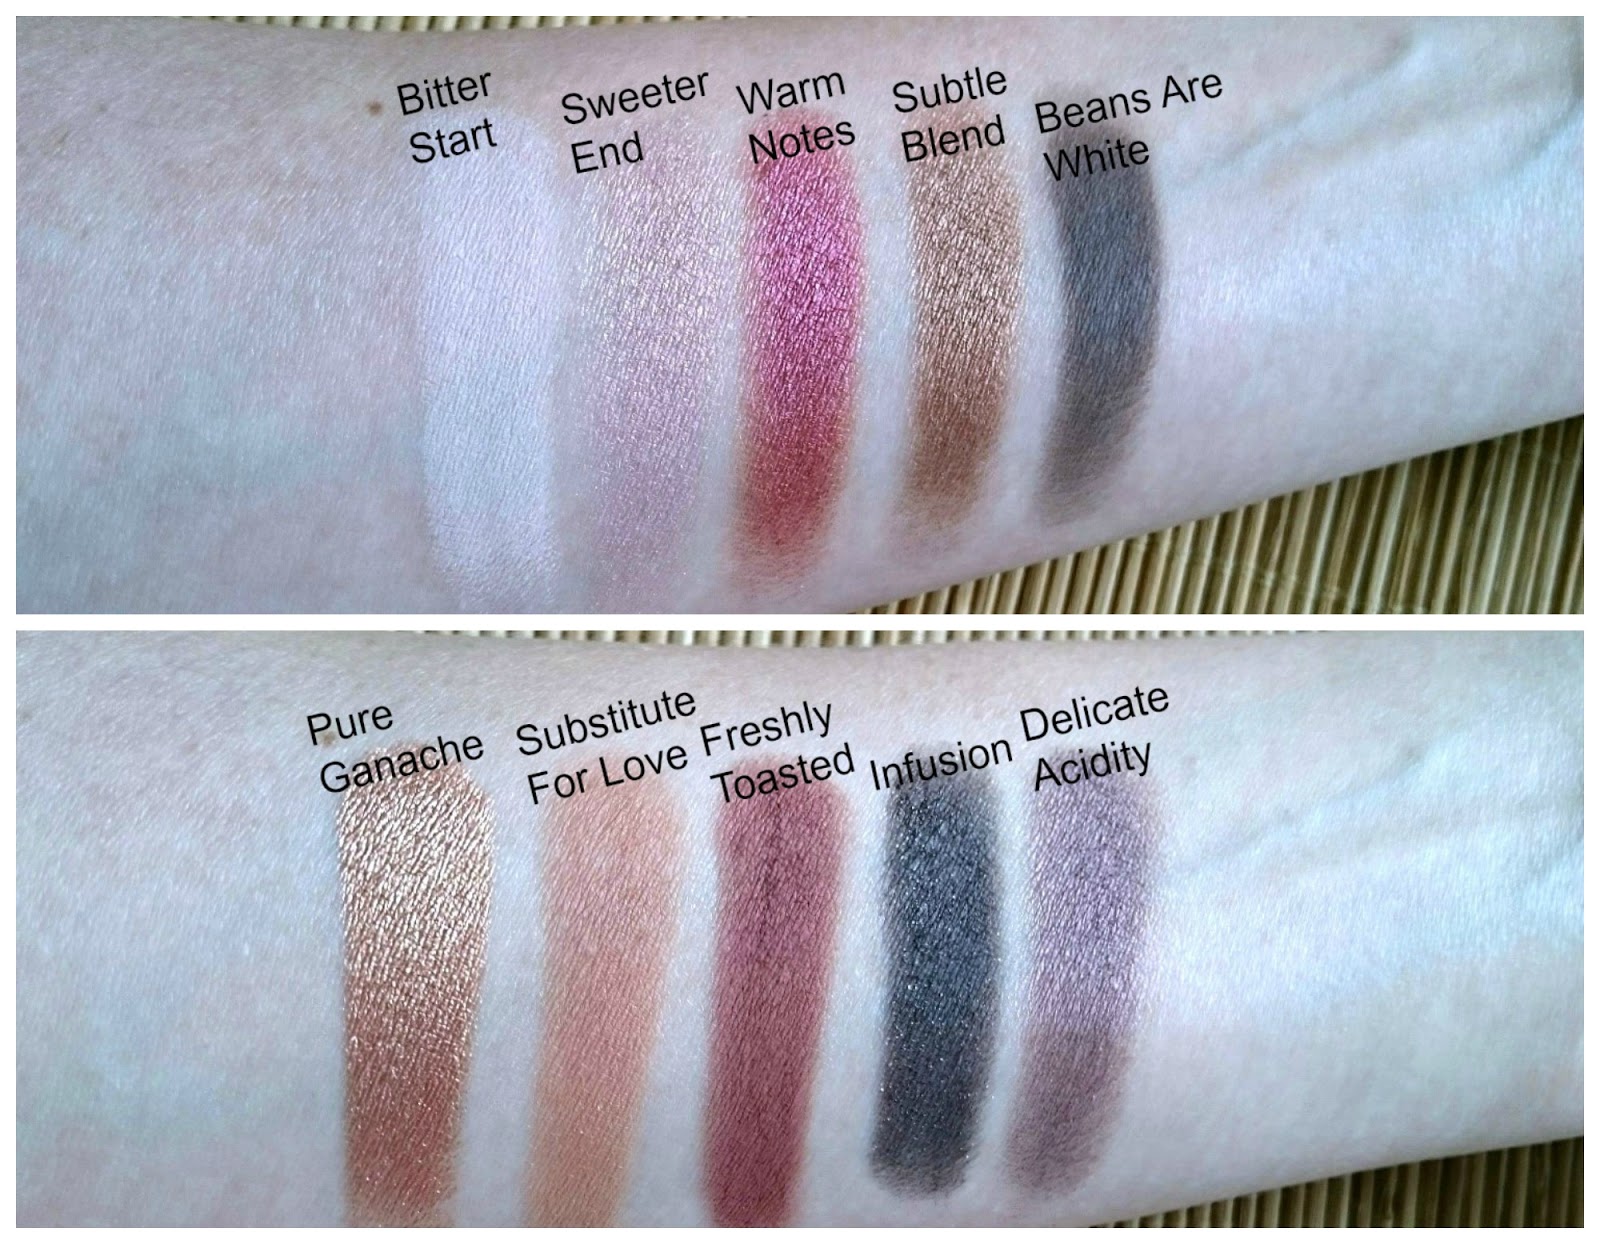 Zoeva Cocoa Blend palette swatches